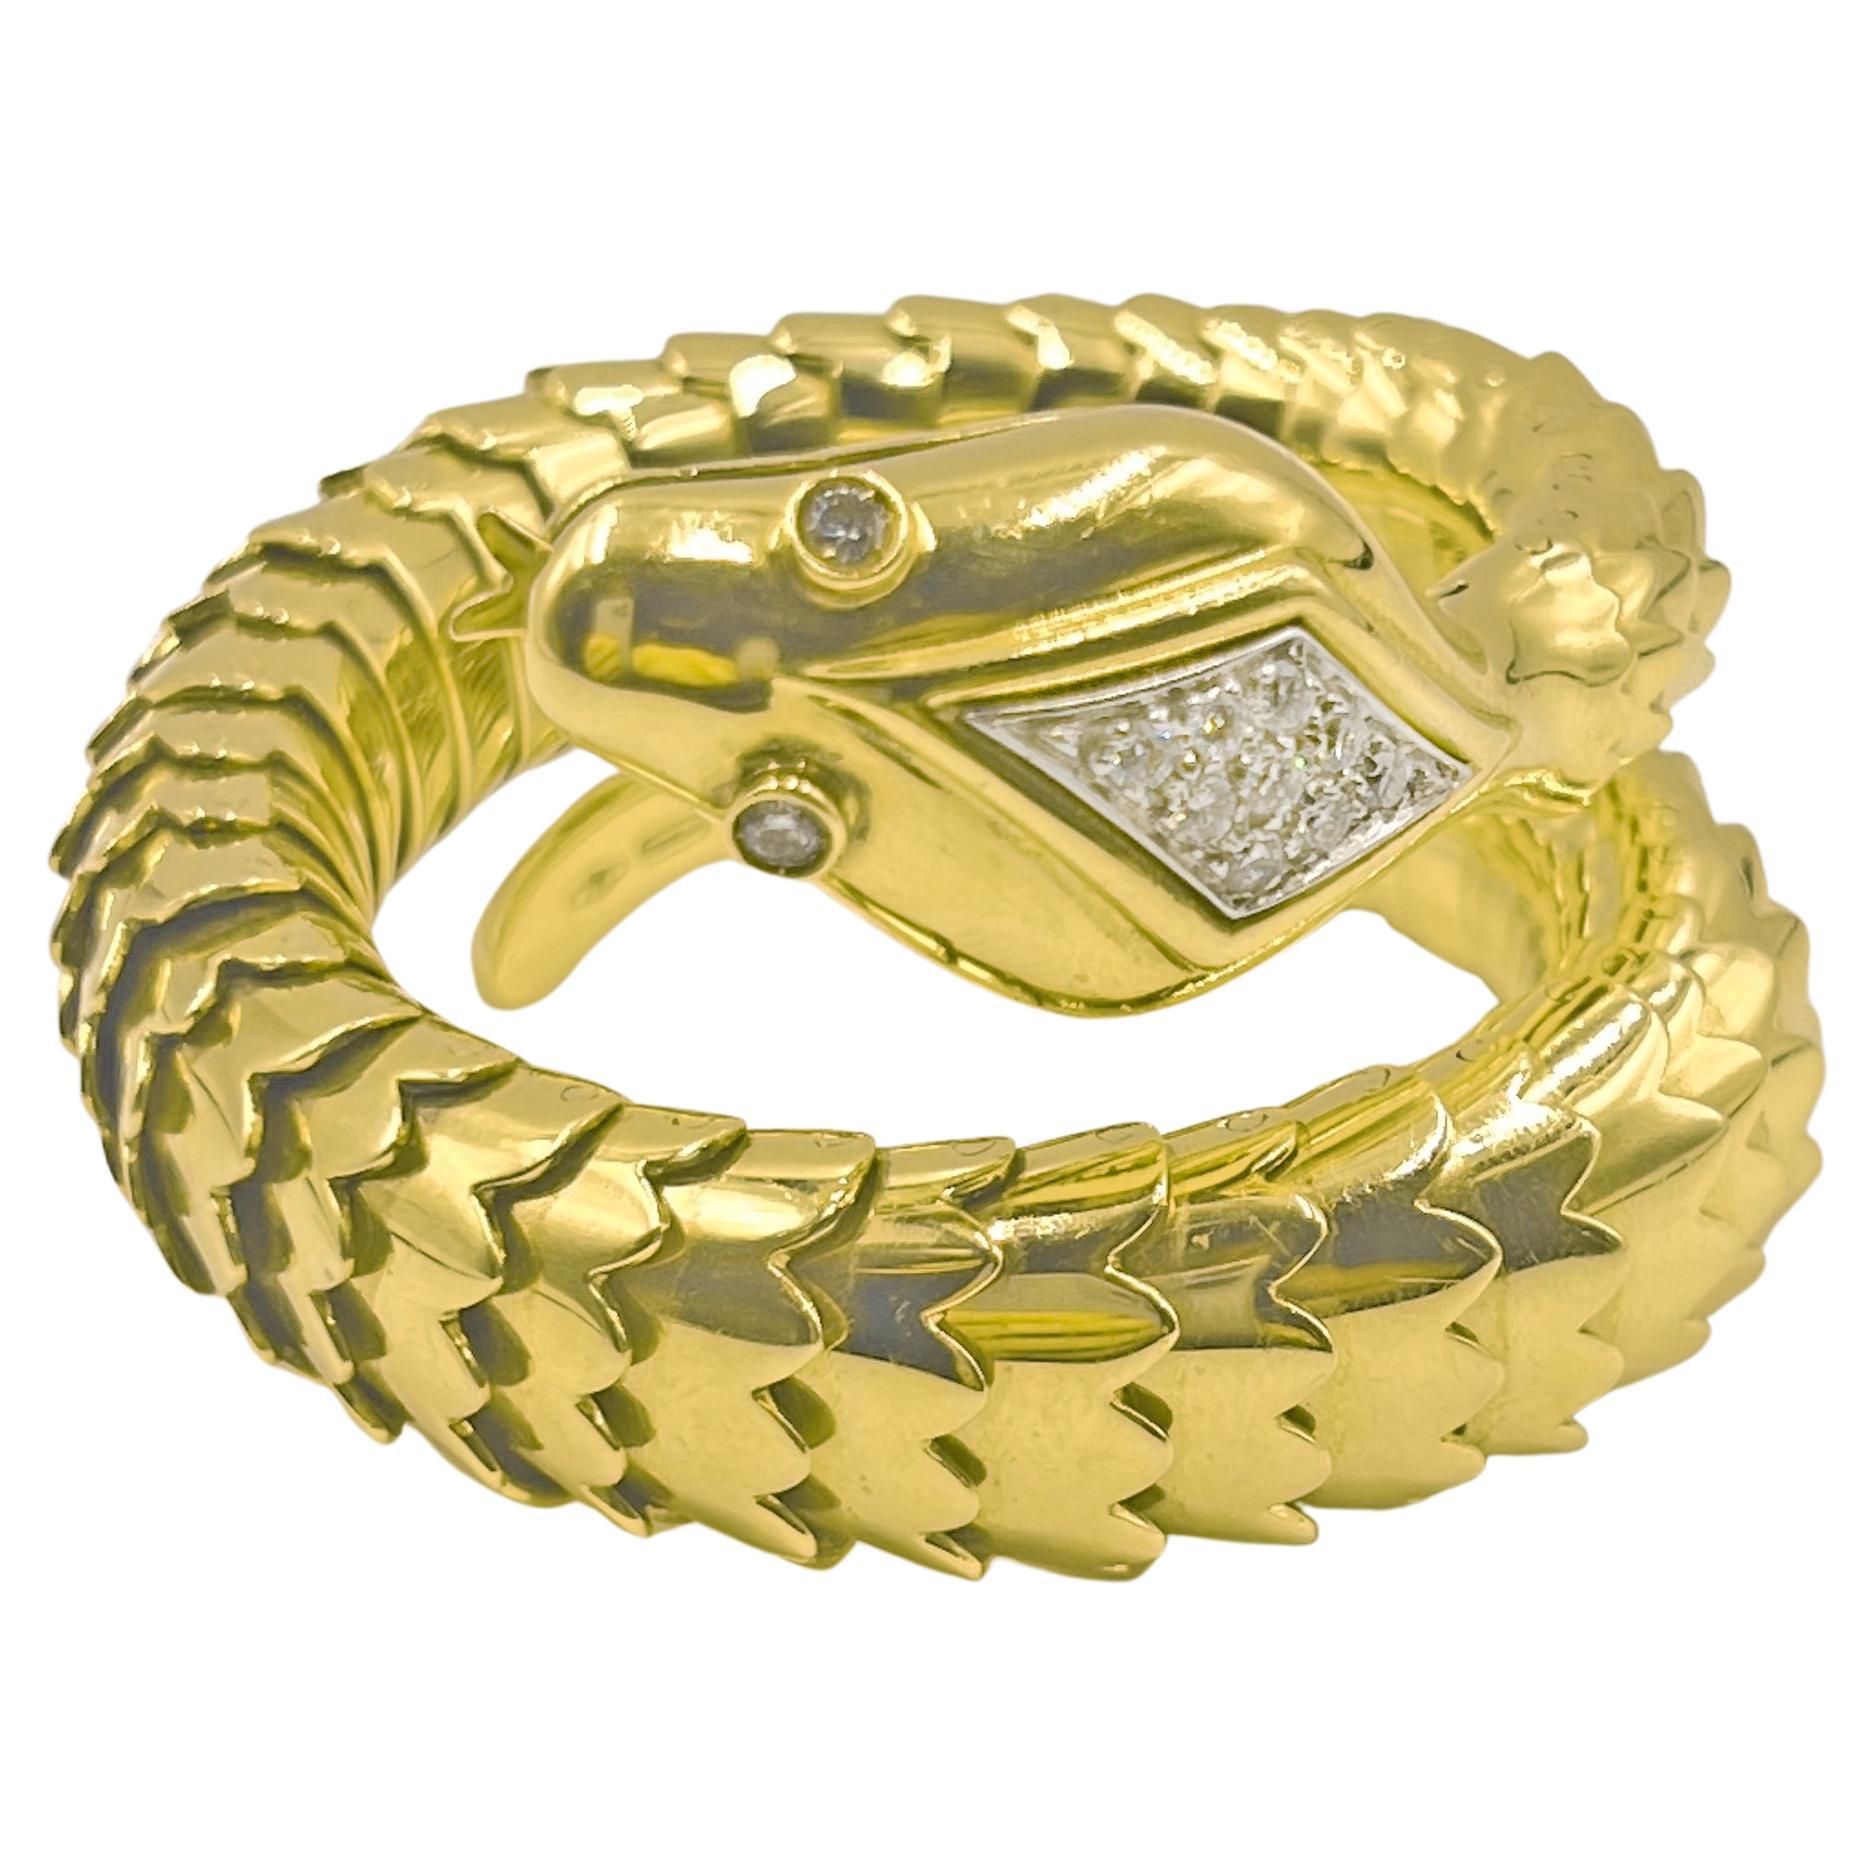 Italian coil snake design bracelet in polished 18k yellow gold. The flexible coil design gently wraps around the wrist with carefully articulated tapered scales. The top of the head is pave-set with nine diamonds and the eyes are bezel set with two